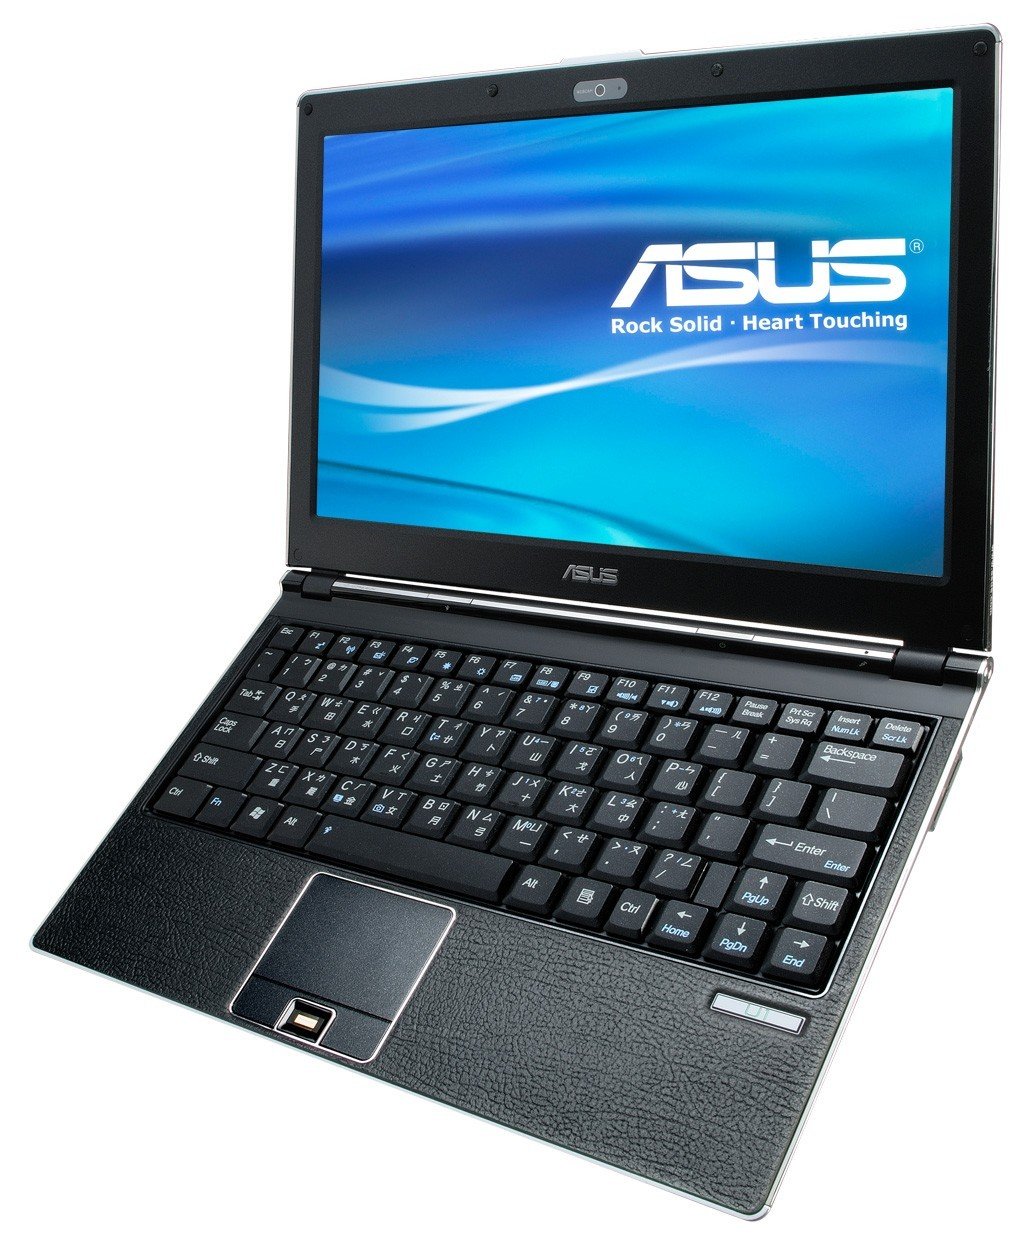 An SSD for an Asus laptop